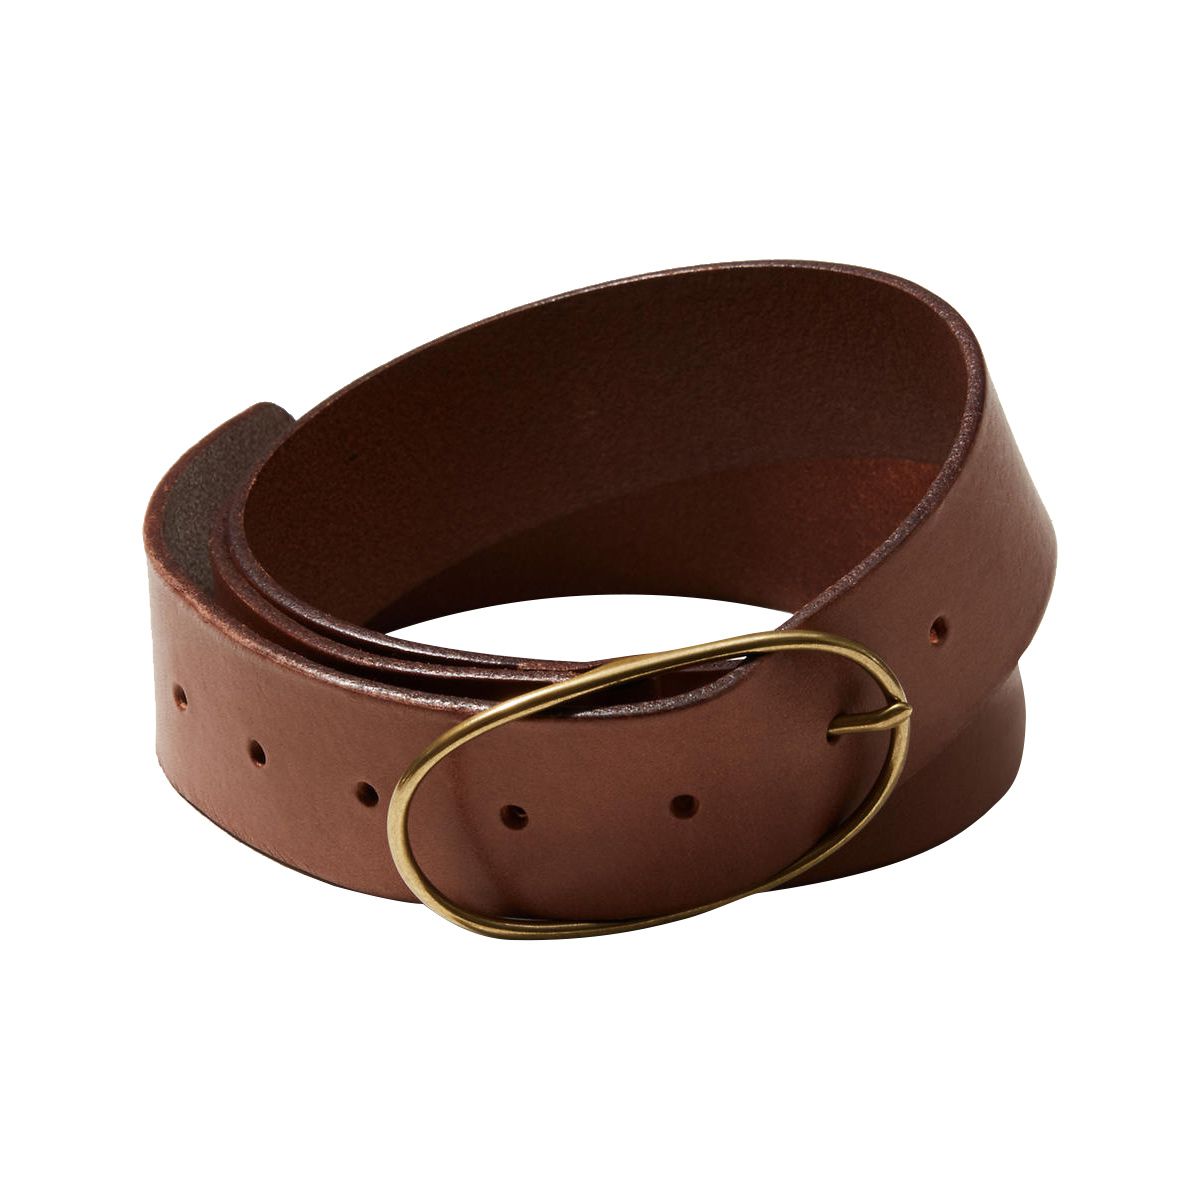 THE LEATHER BELT